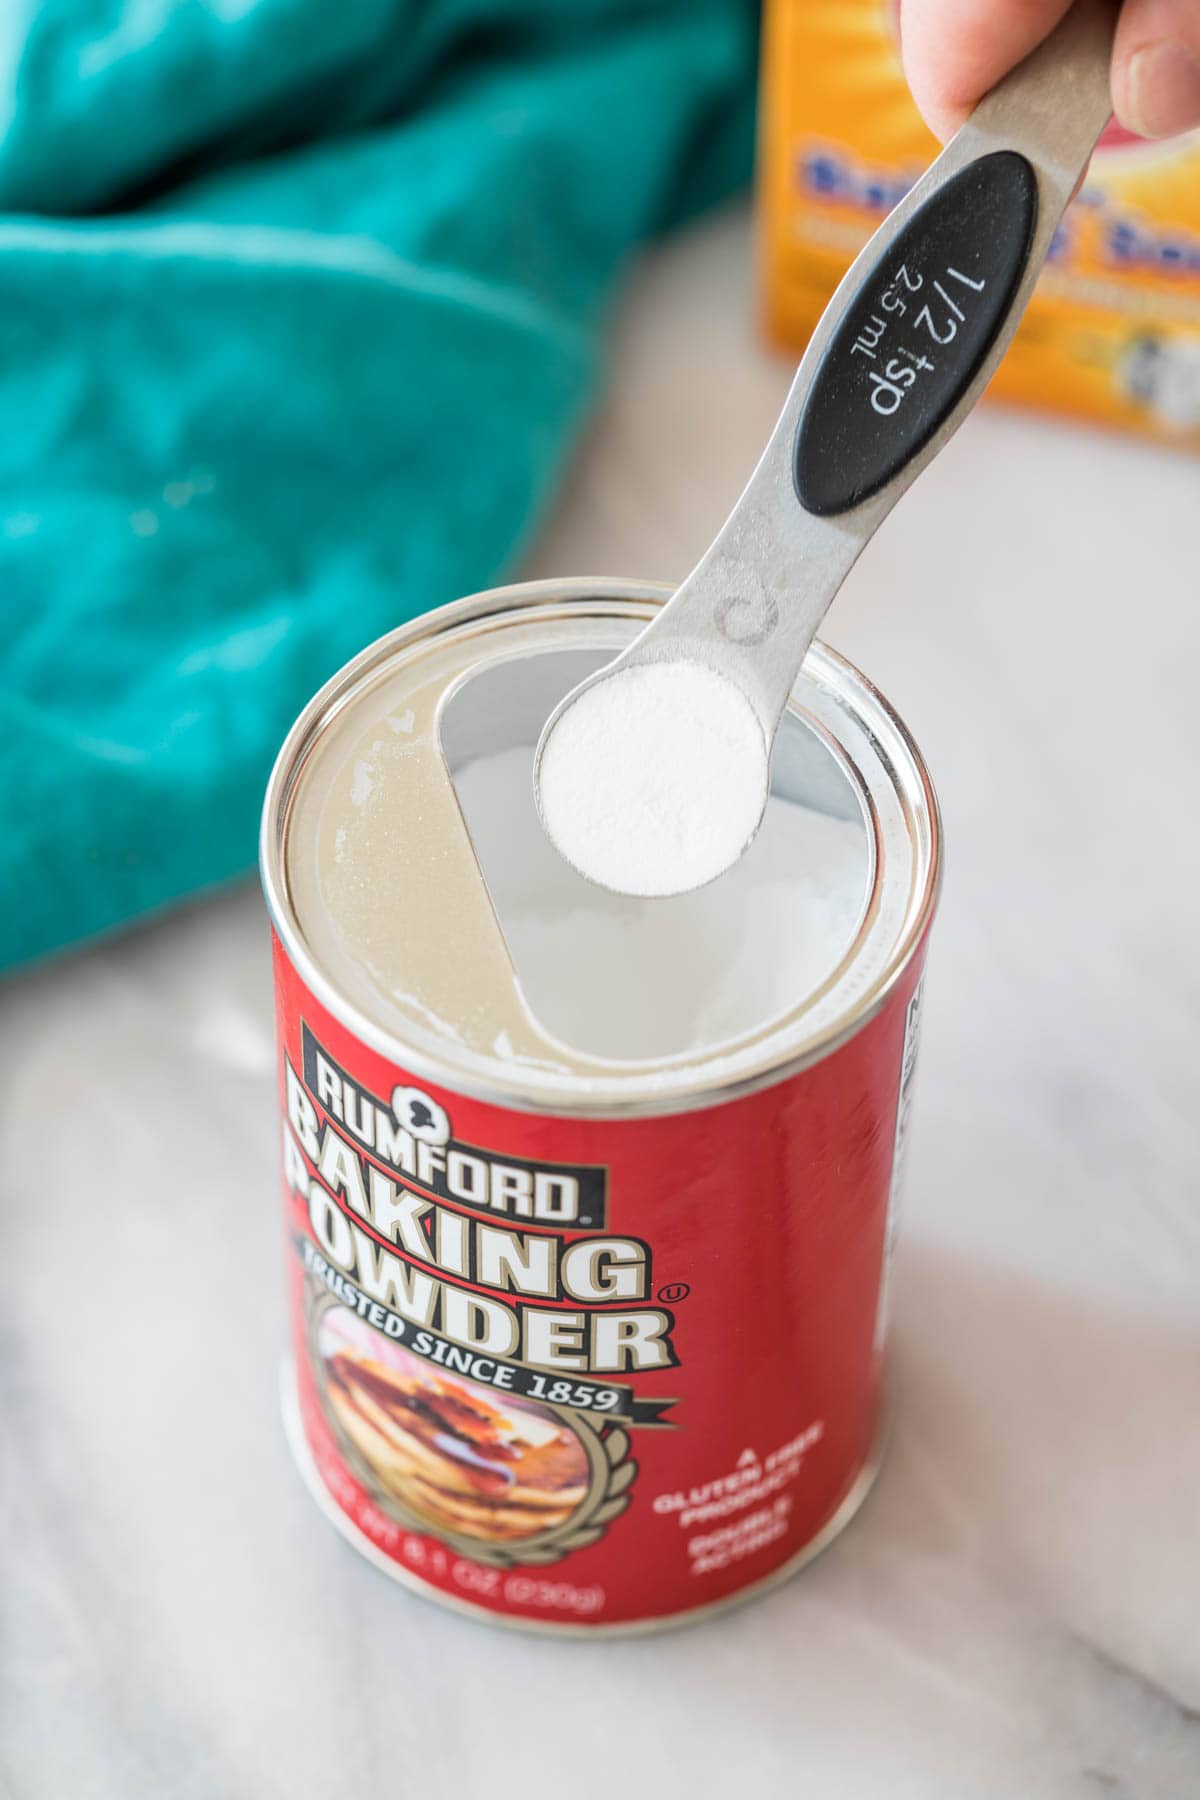 measuring spoon scooping baking powder out of its container